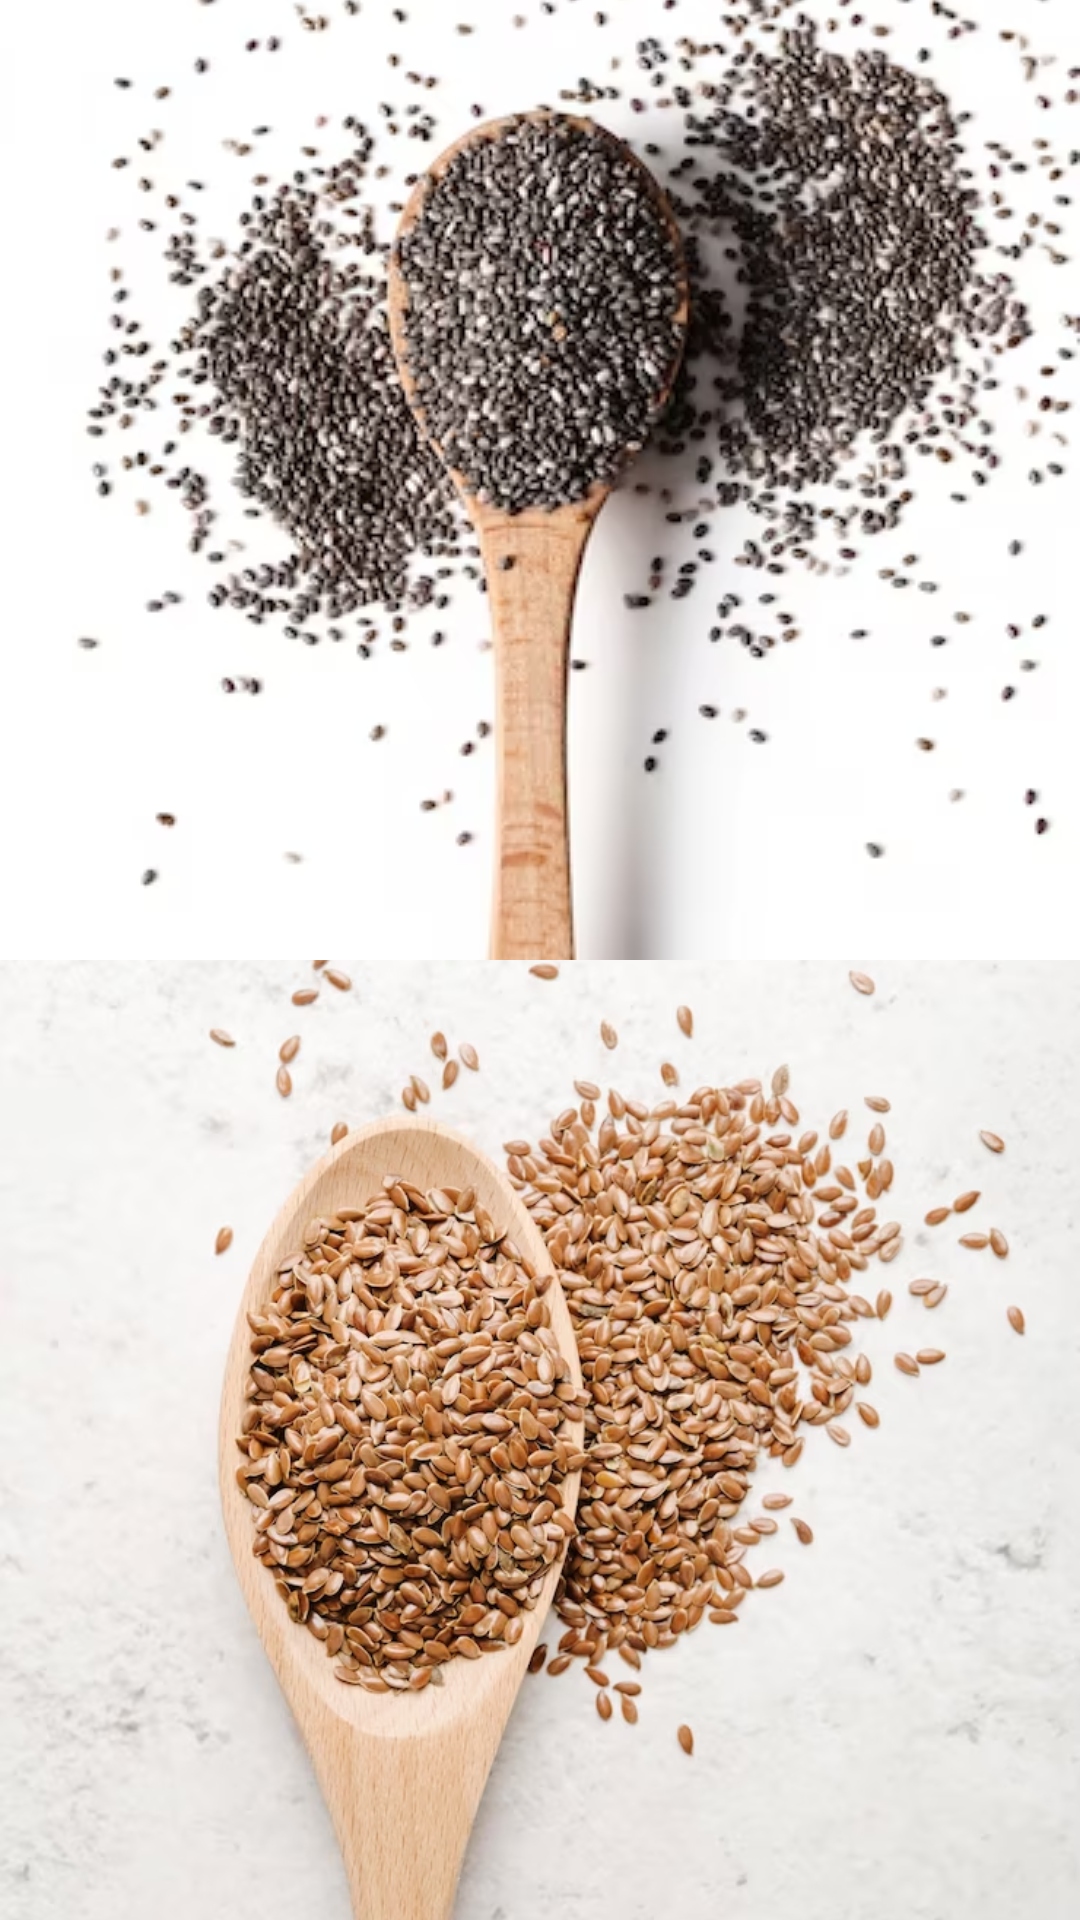 Can you eat chia seeds and flax seeds together for weight loss?